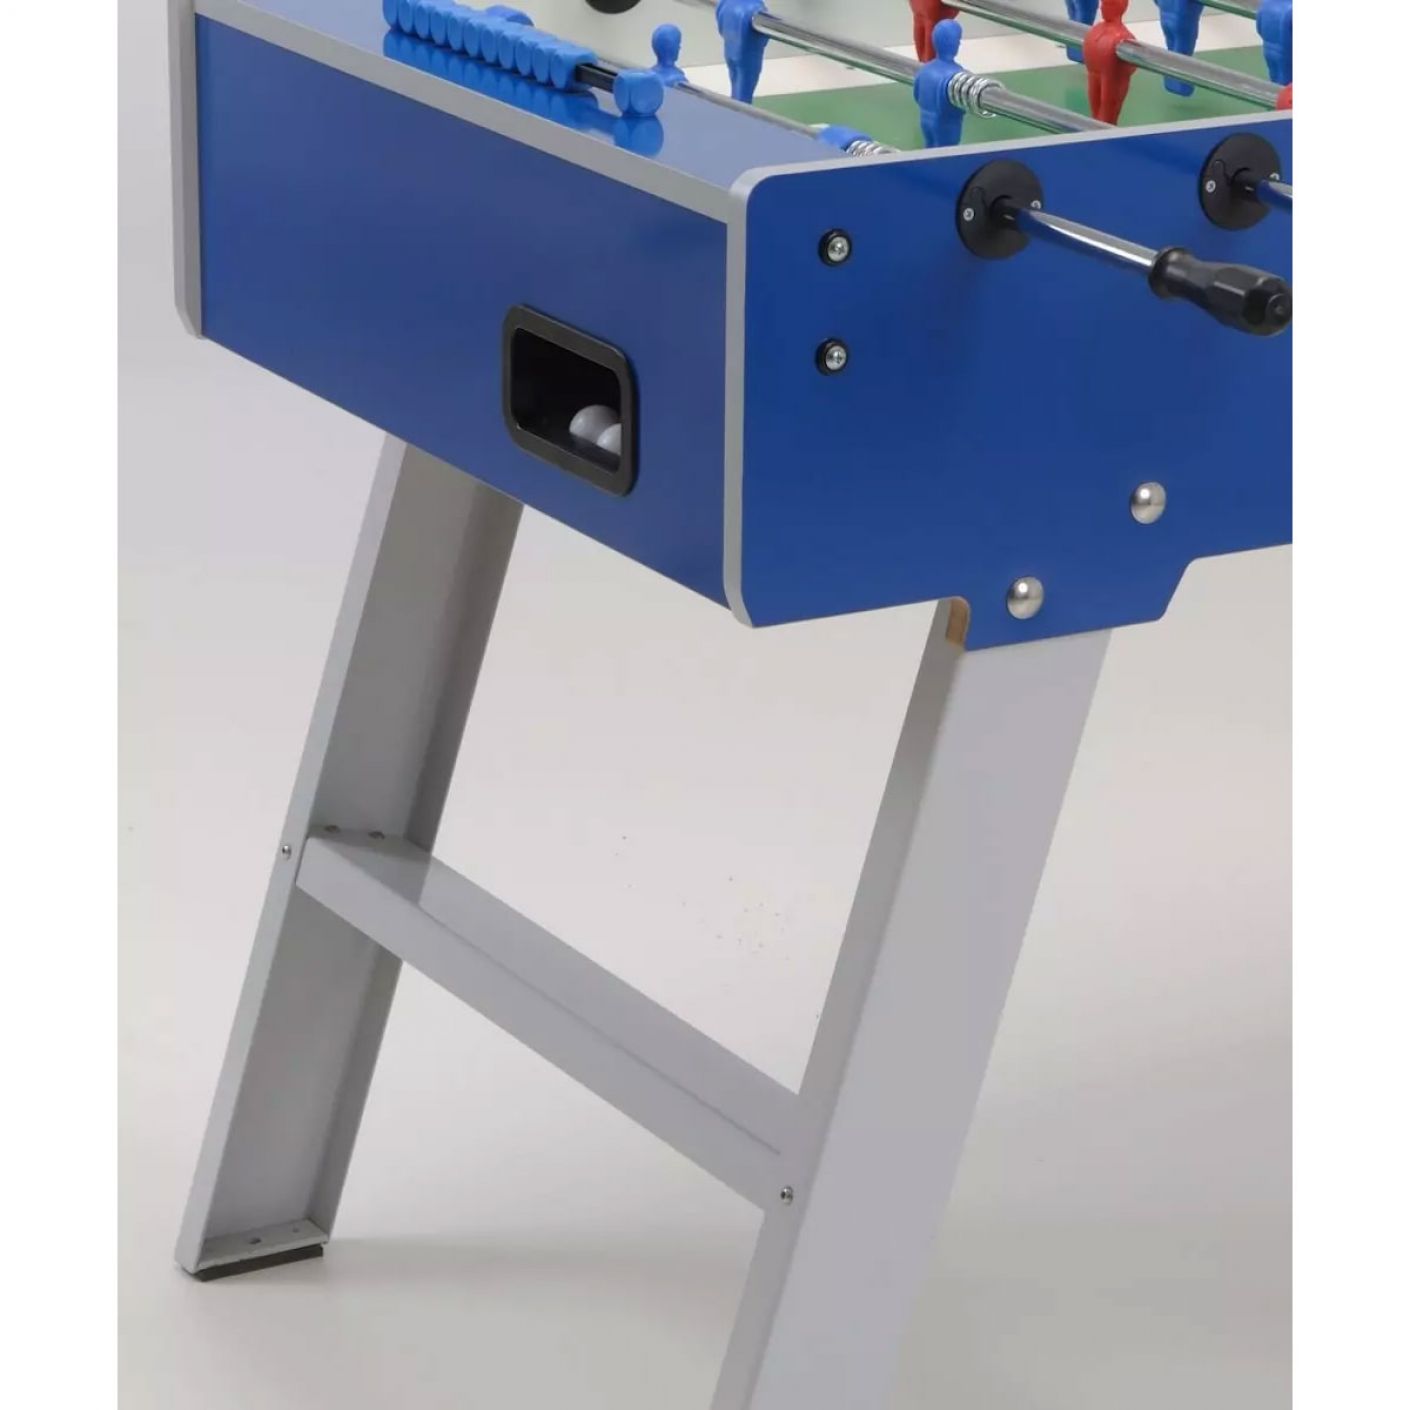 Garlando Football Table Master Pro Weatherproof with outgoing temples, folding legs